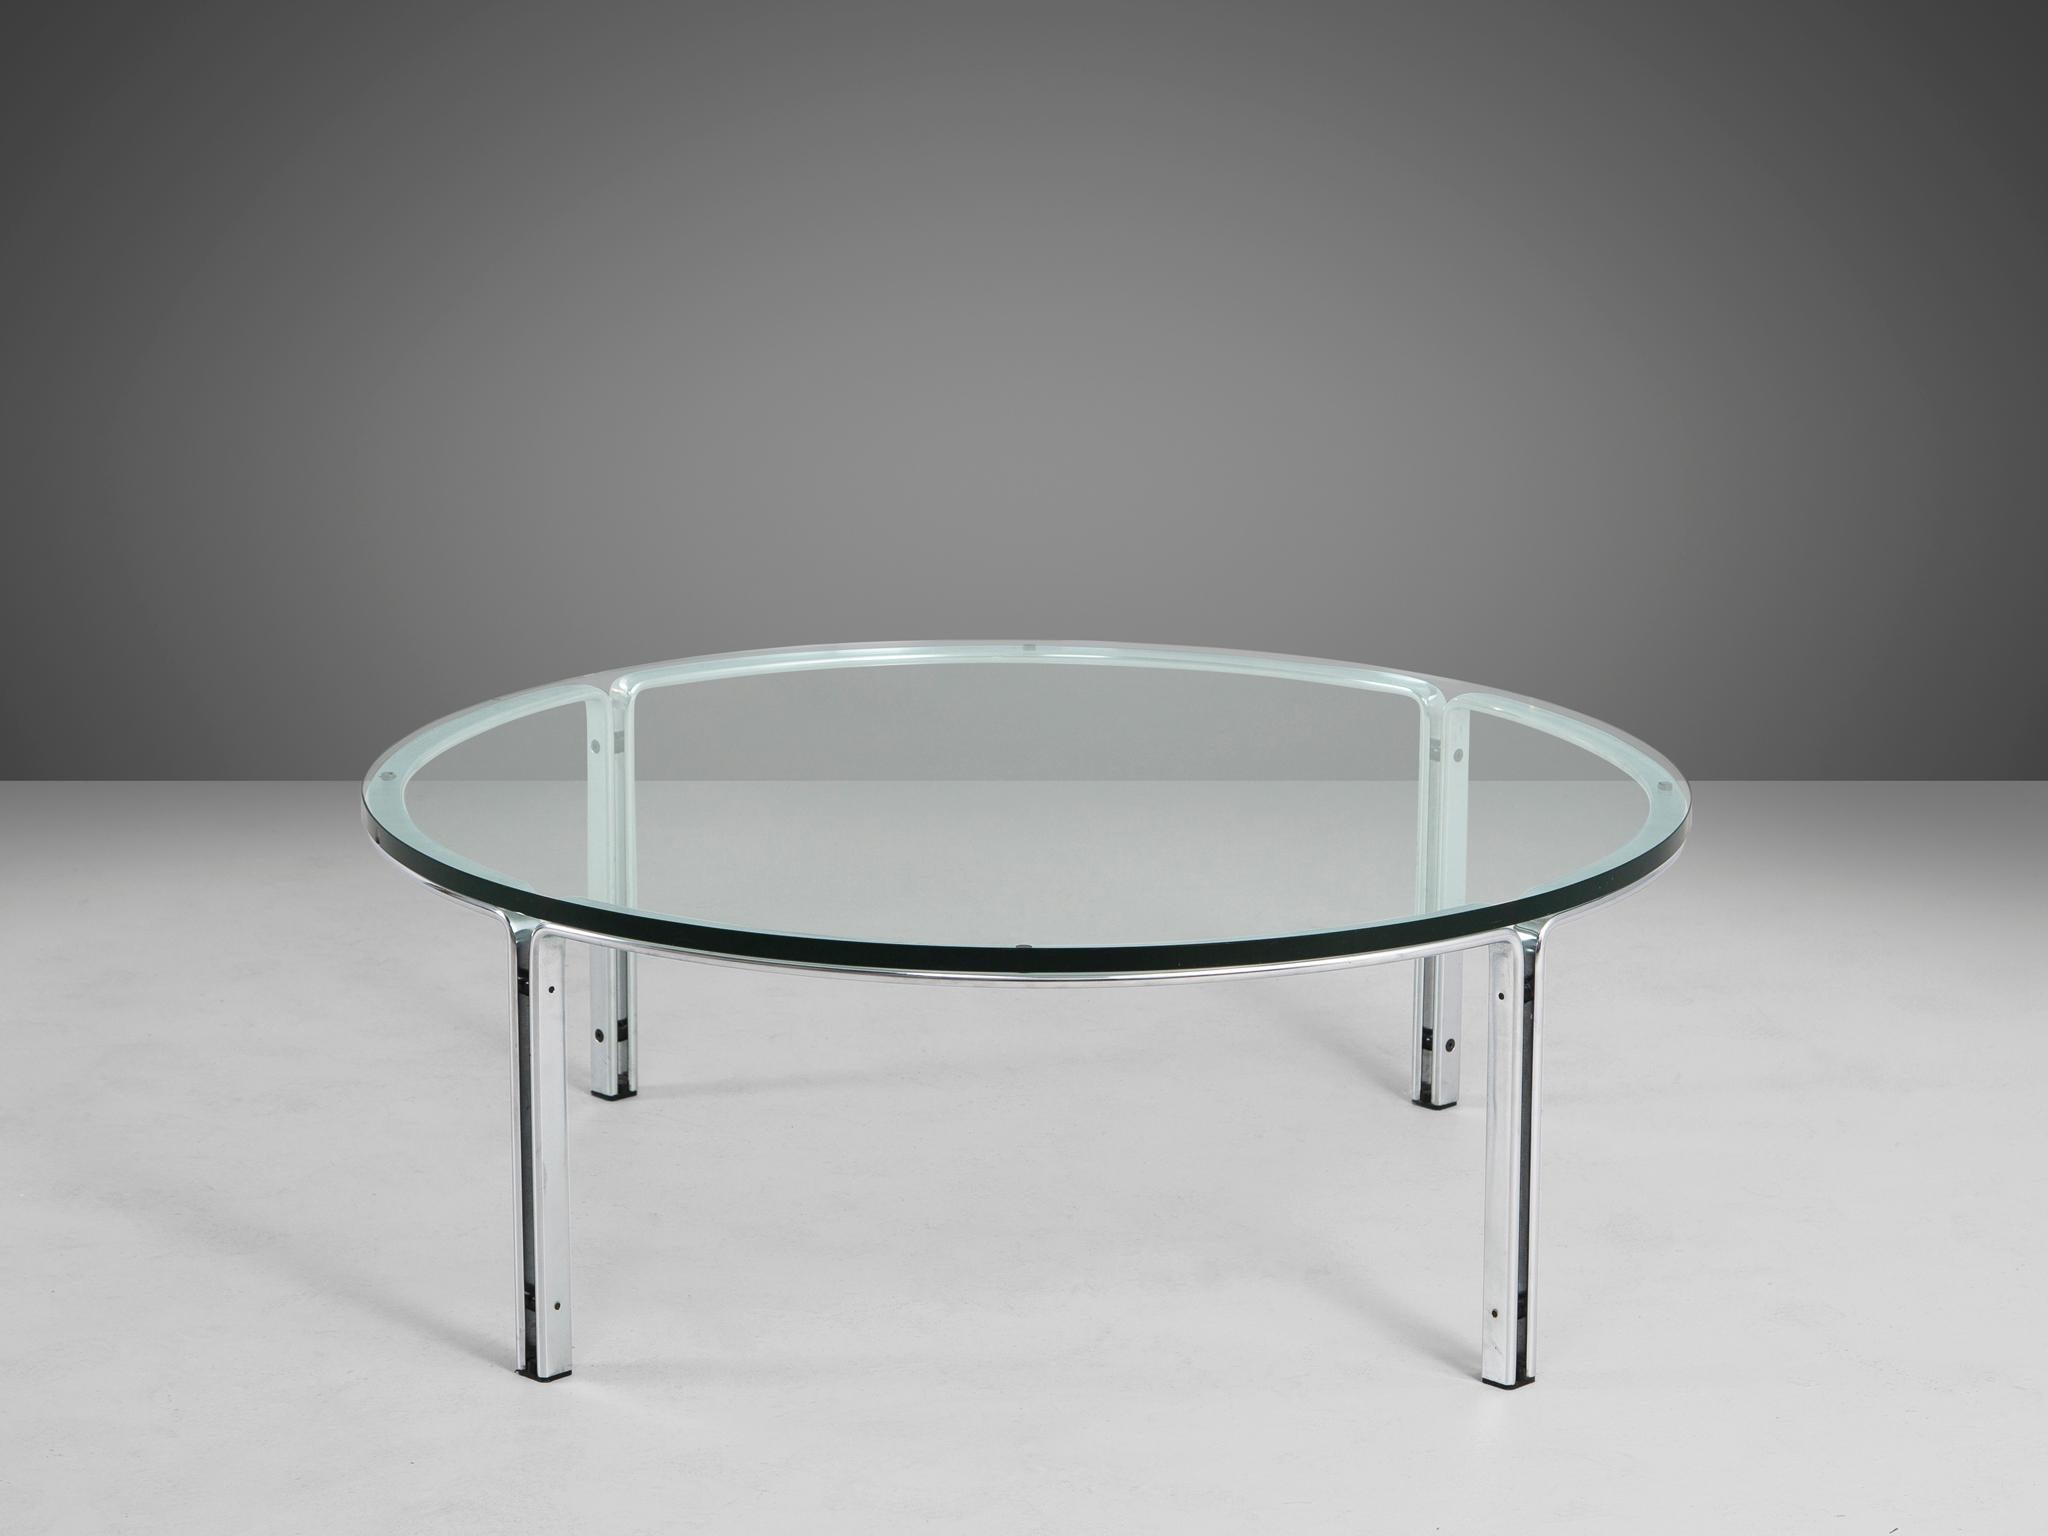 Horst Brüning for Kill International, coffee table, steel and glass, Germany, 1970s

Round cocktail table in chrome plates steel and glass. The design by Brüning is simplistic, yet due the combination of materials, this table gets it characteristic